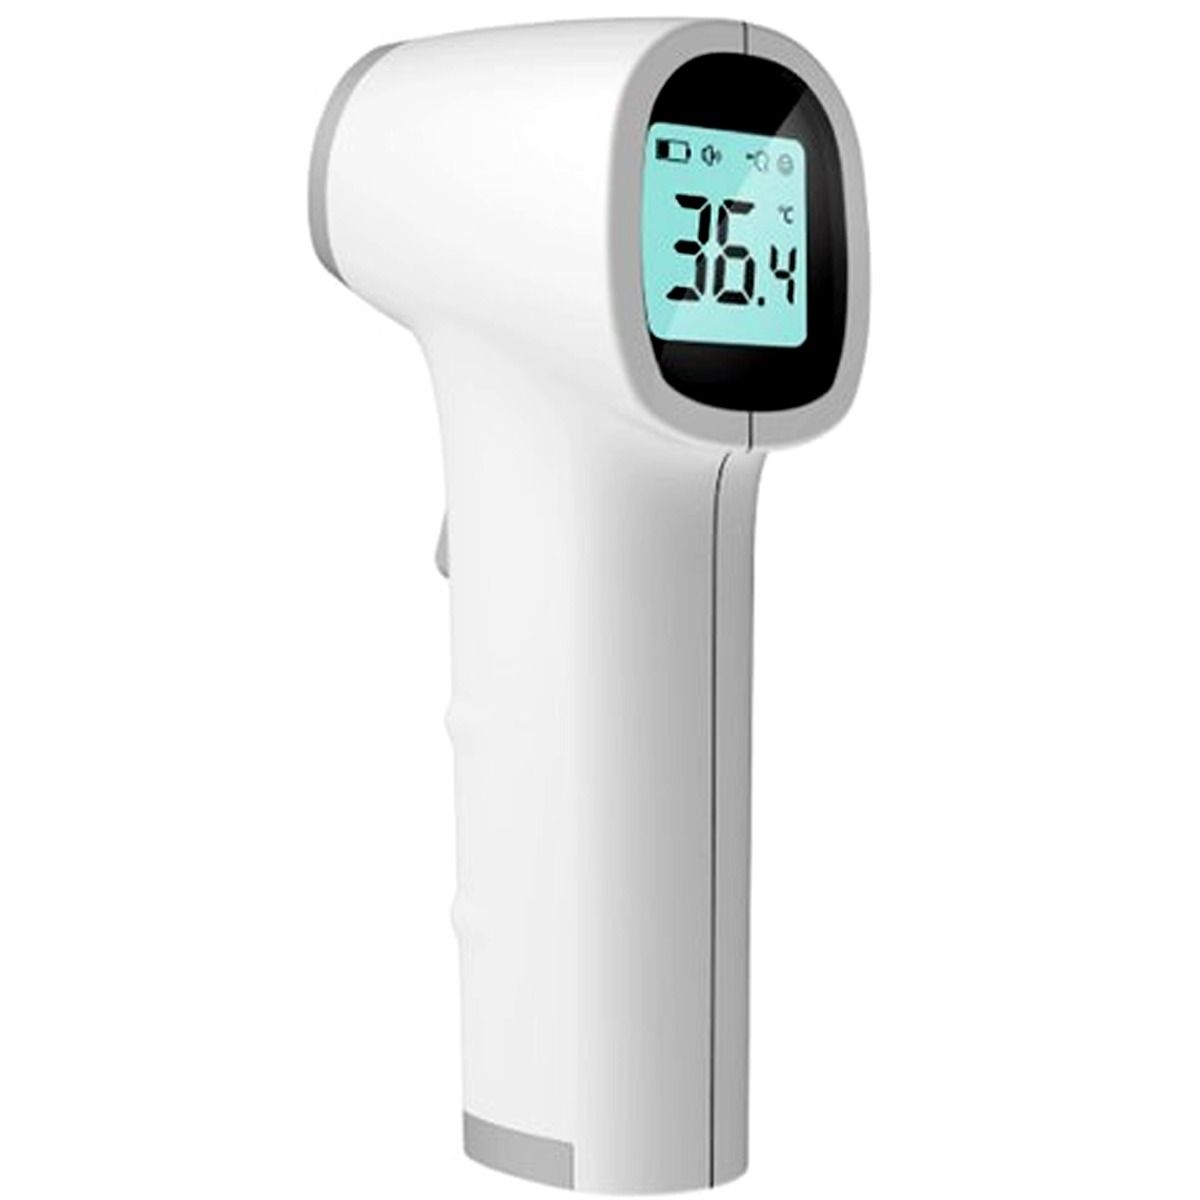 Contec TP500 Infrared Thermometer, Pack of 1 